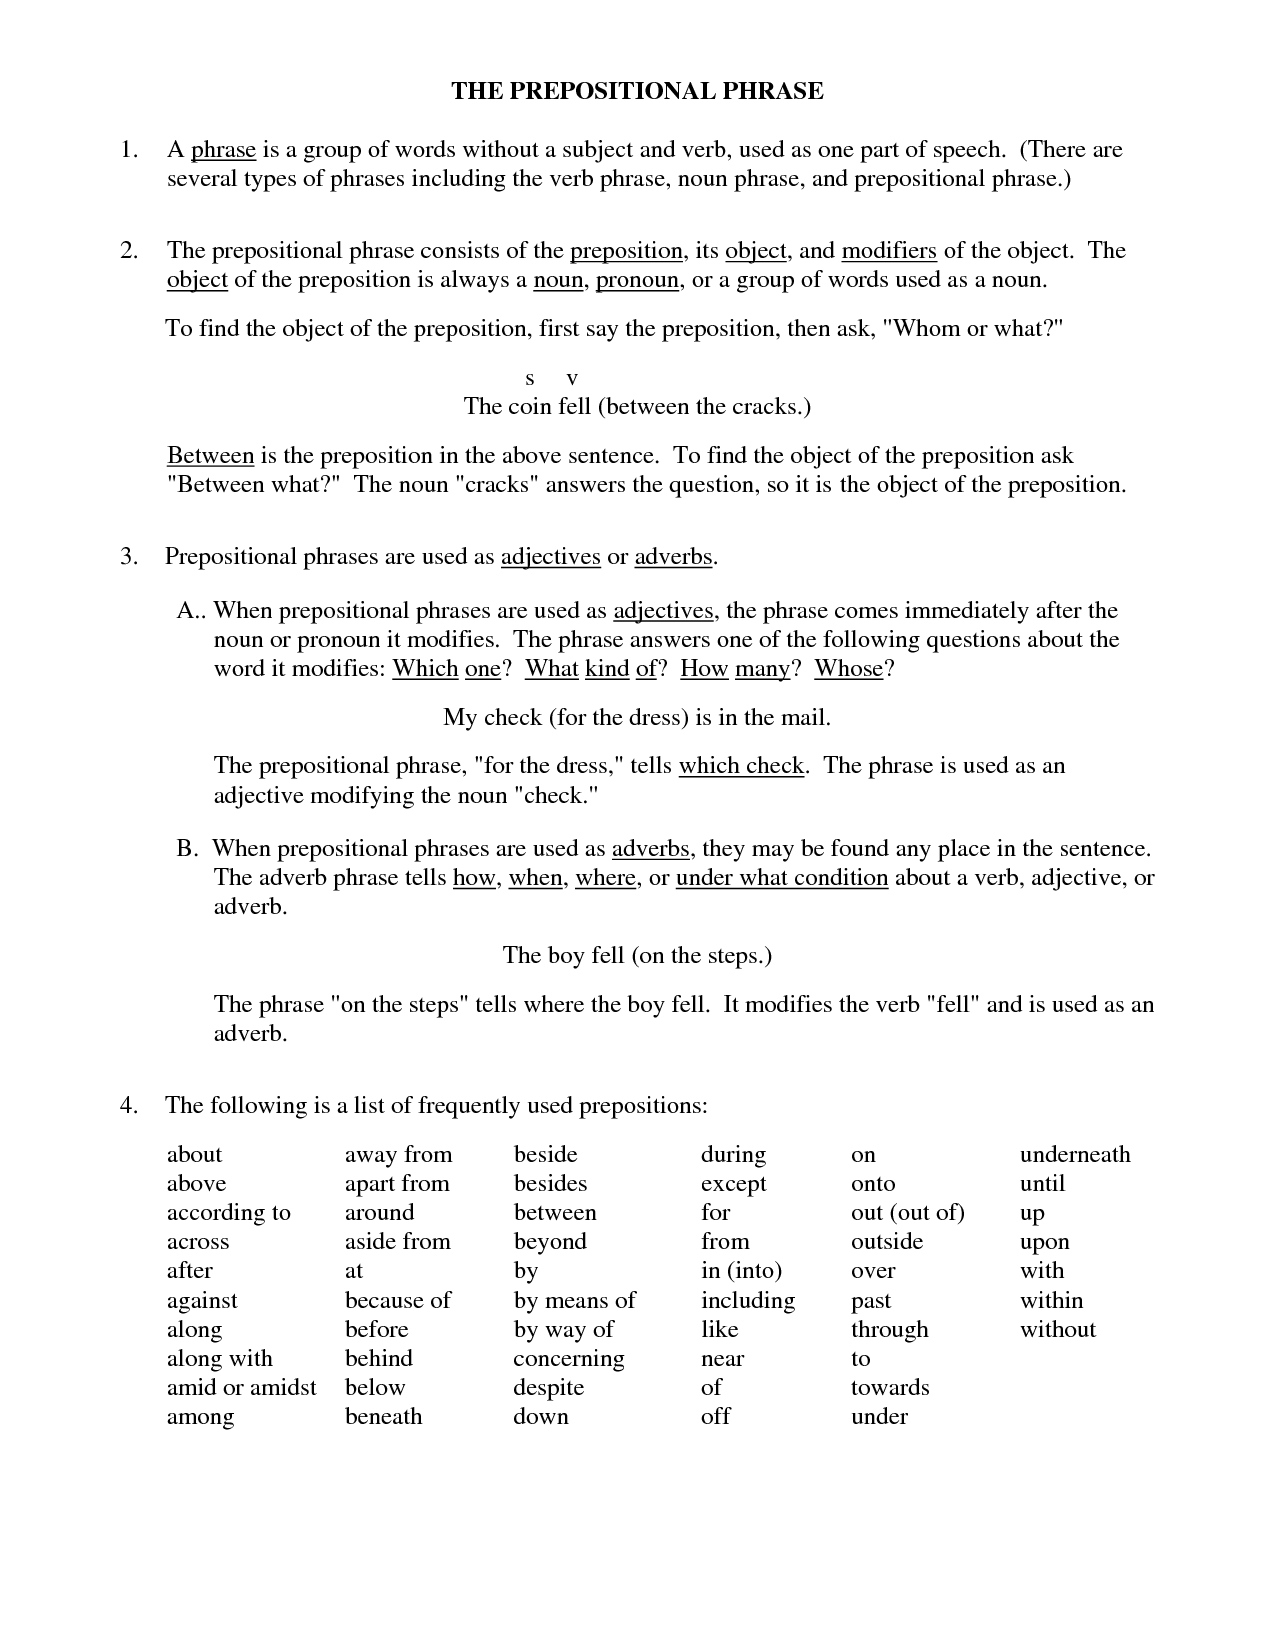 15-best-images-of-prepositions-prepositional-phrases-worksheet-prepositions-and-prepositional